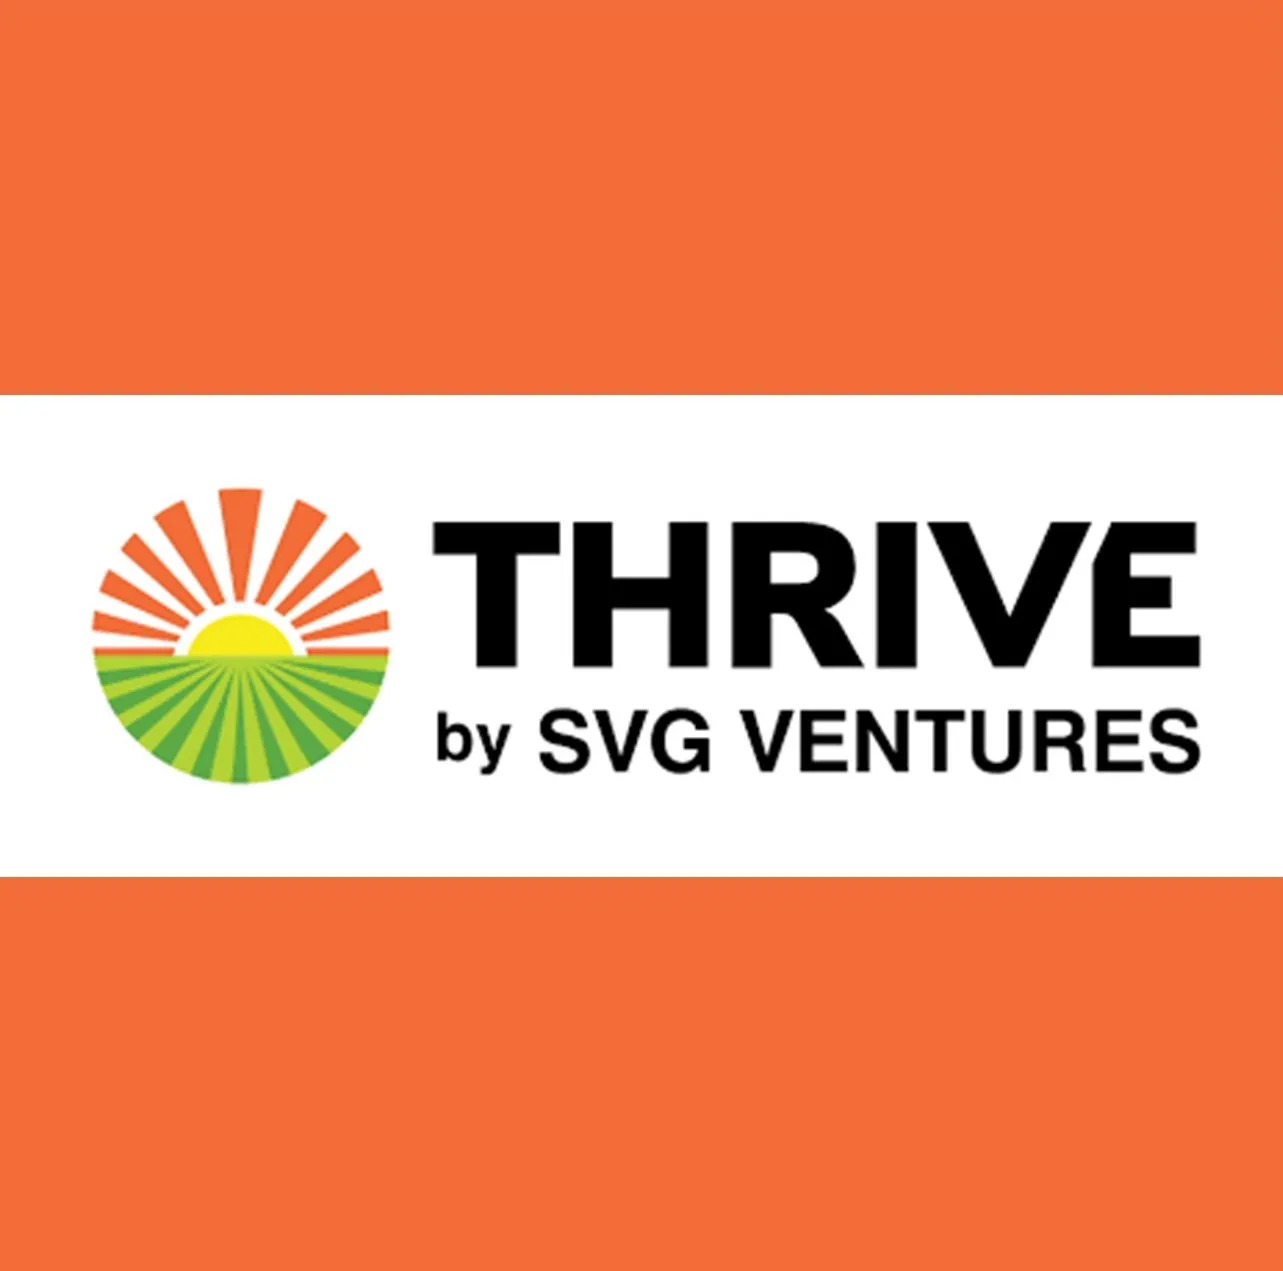 LIVESTOCK WATER RECYCLING SELECTED FROM OVER 900 APPLICANTS AS FINALIST IN THRIVE GLOBAL IMPACT CHALLENGE